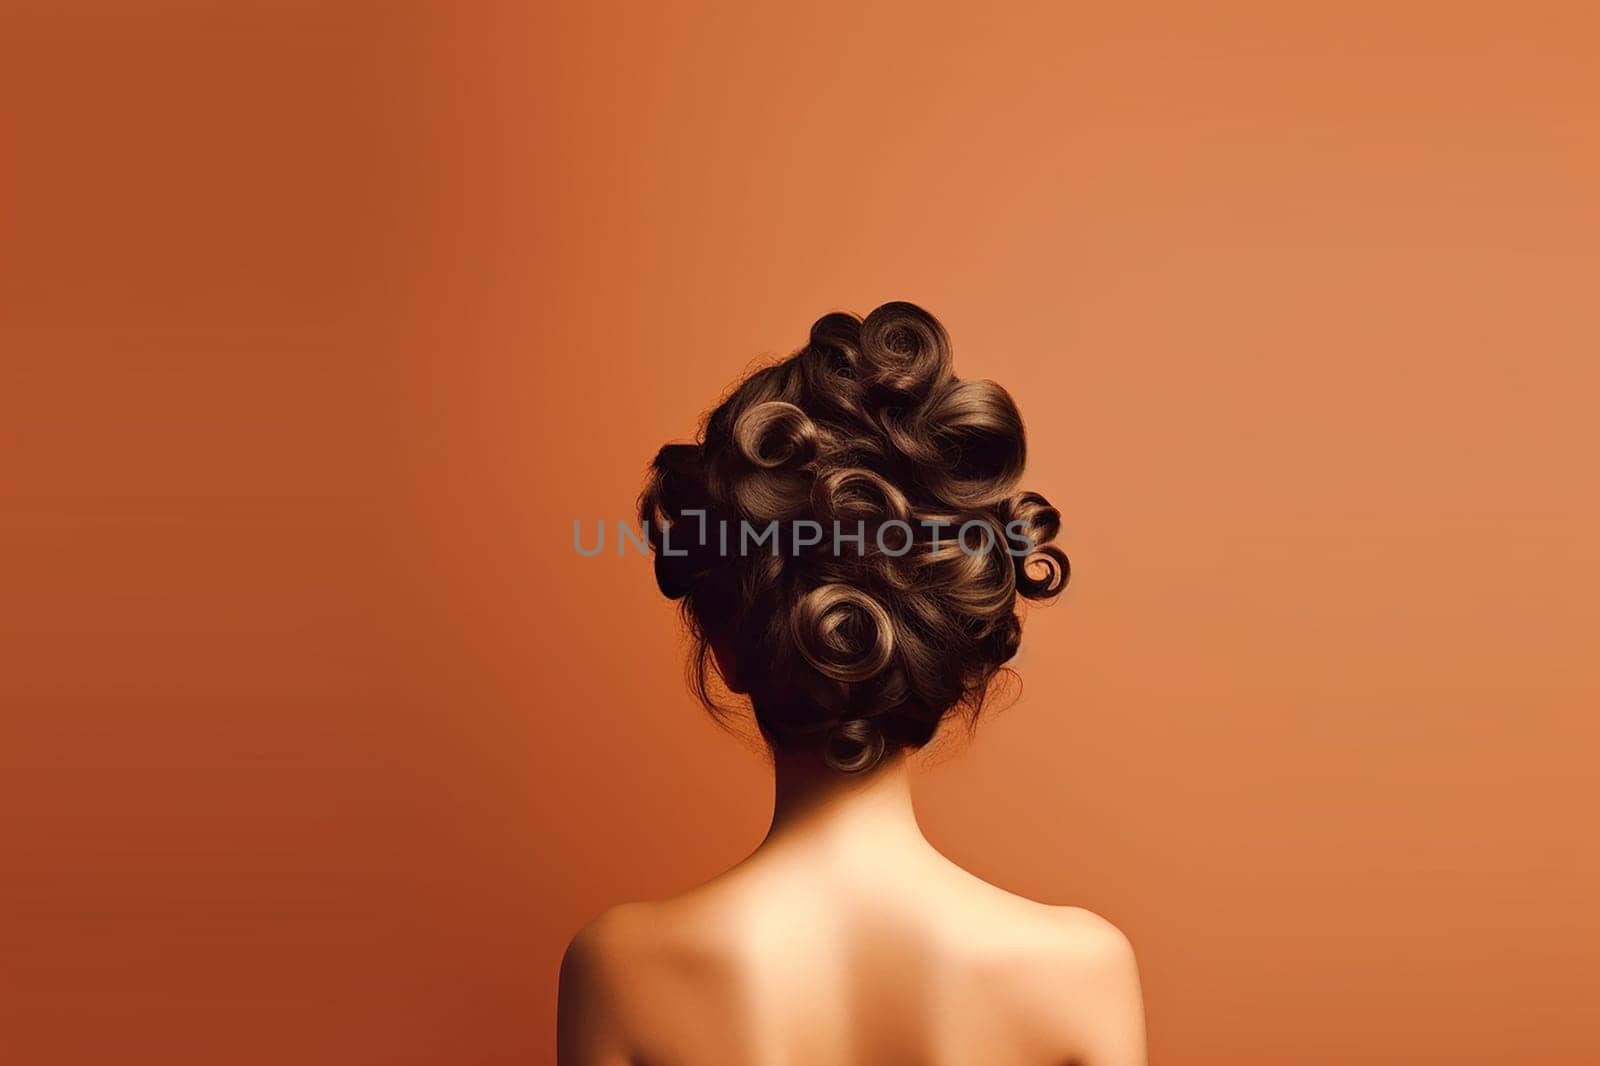 Elegant hairstyle with artistic curls on a woman against a warm background.